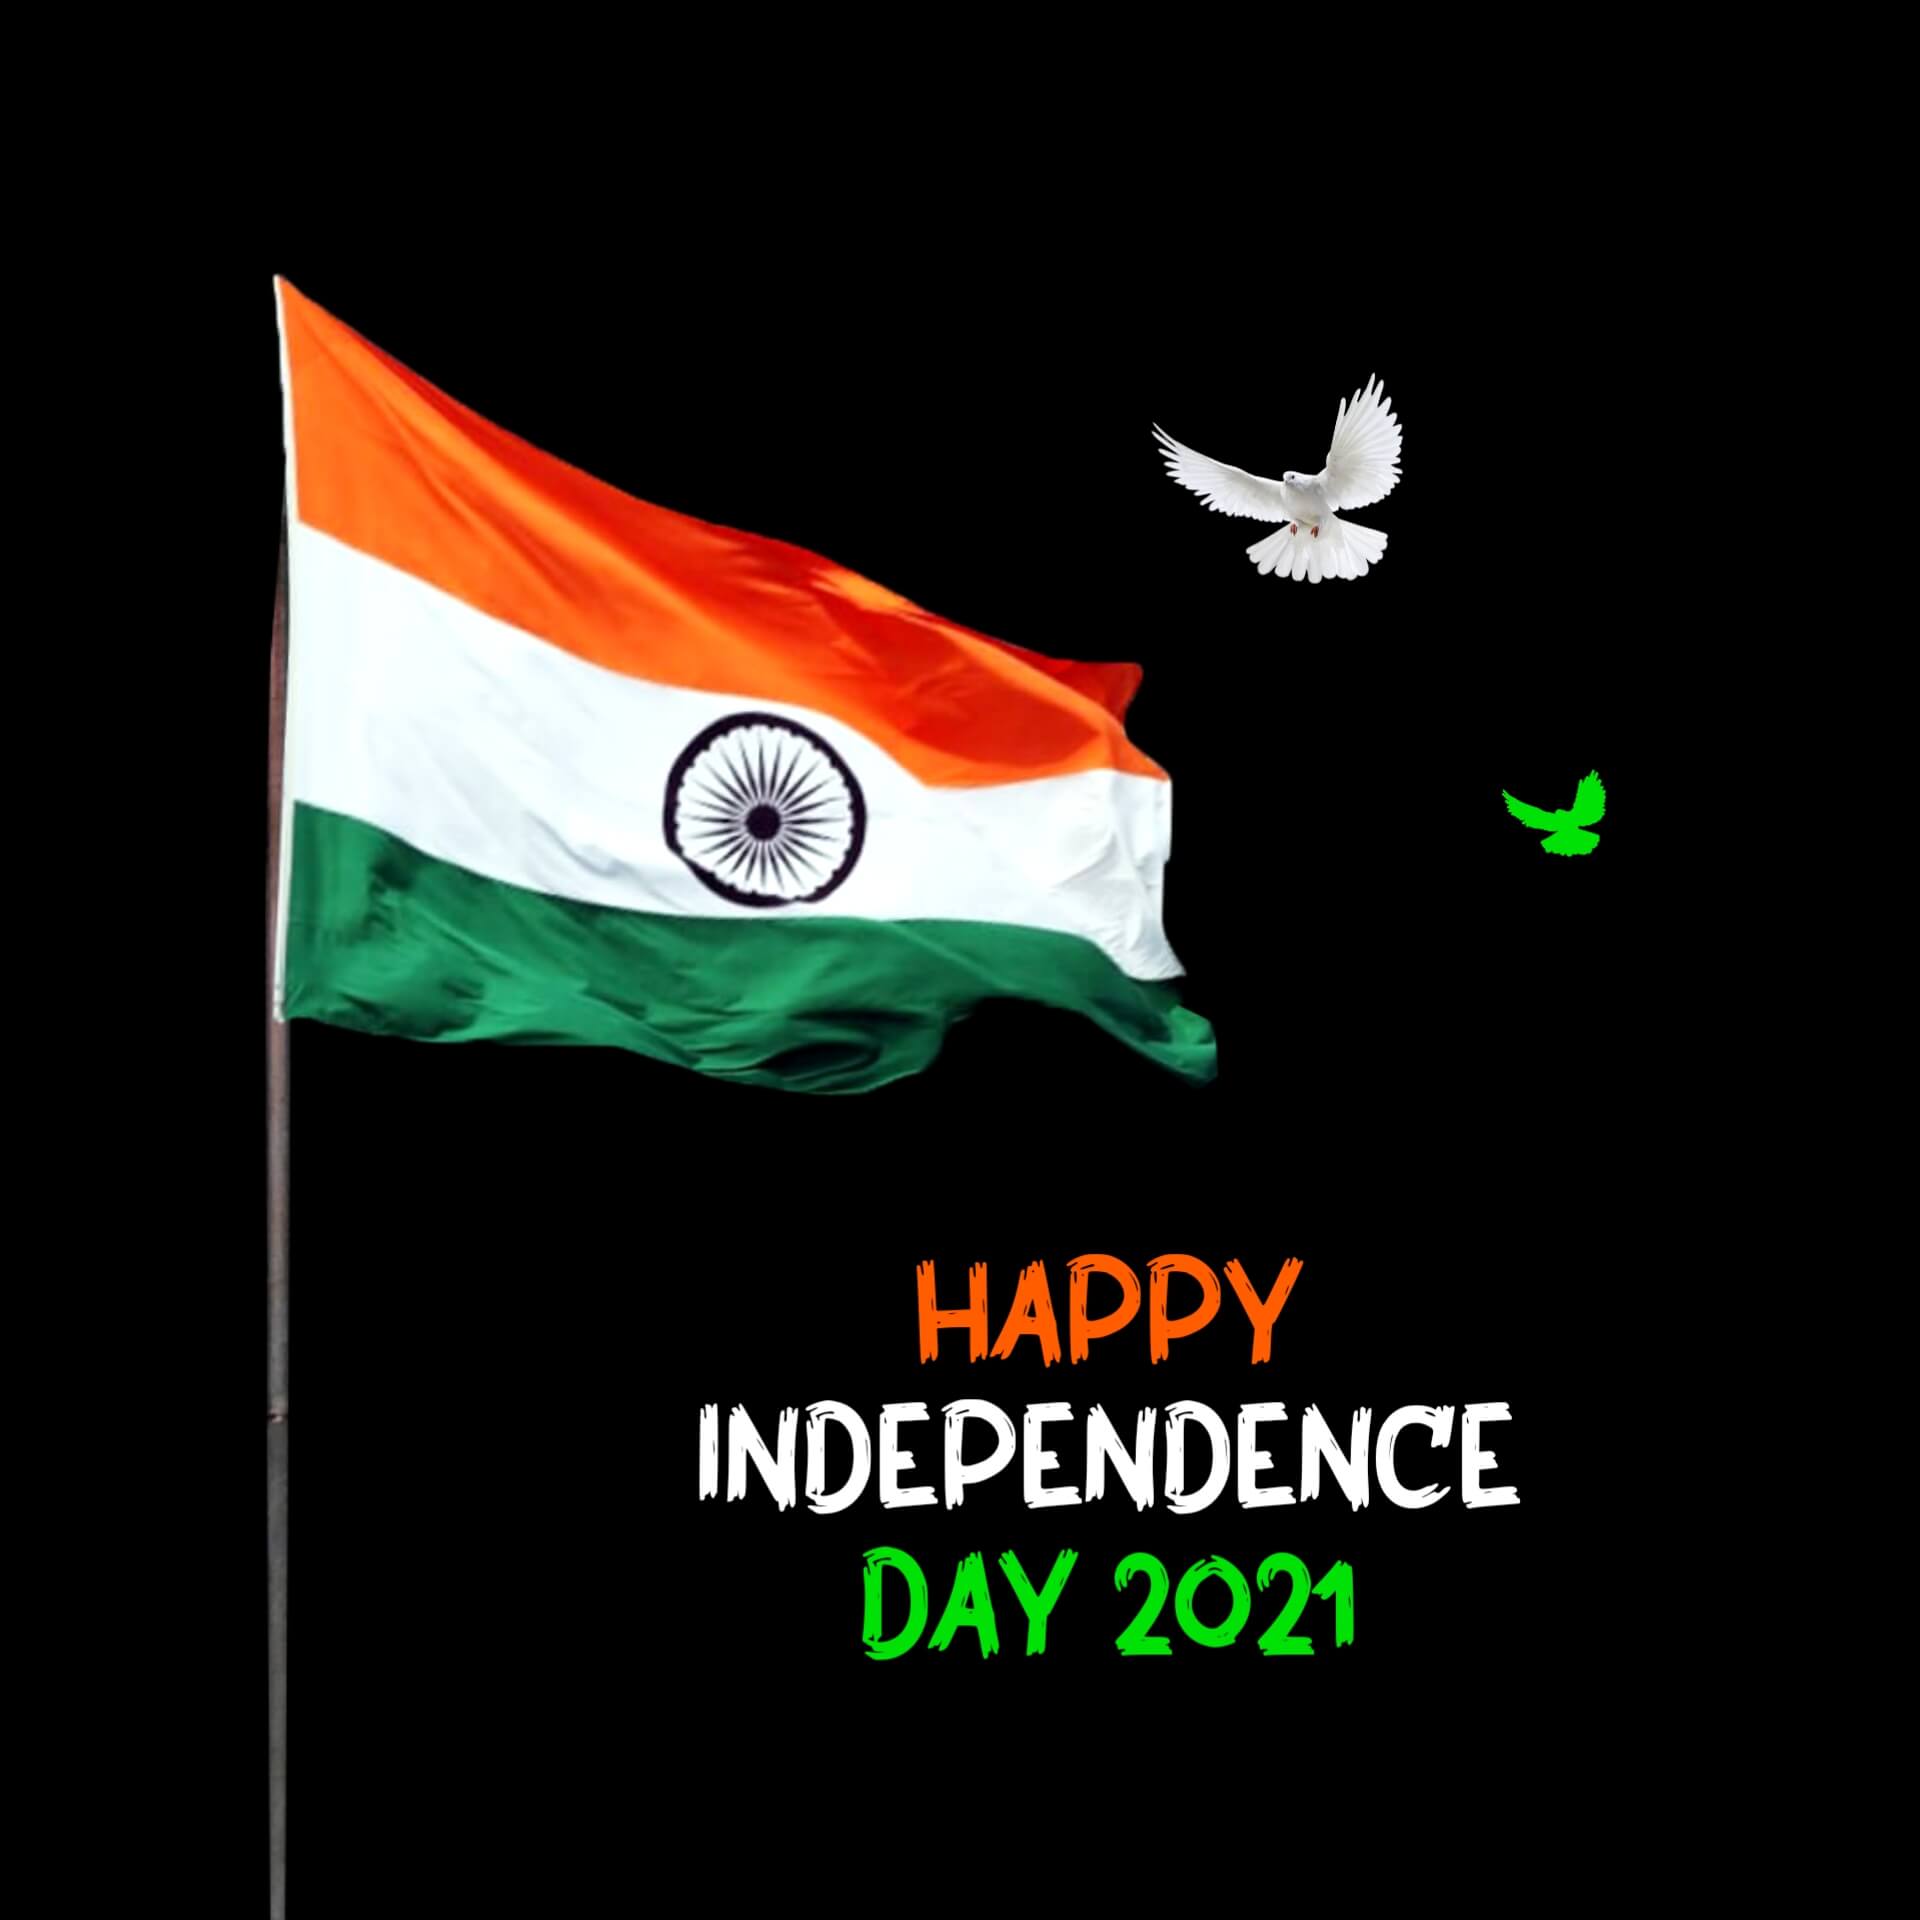 india independence day images 2021